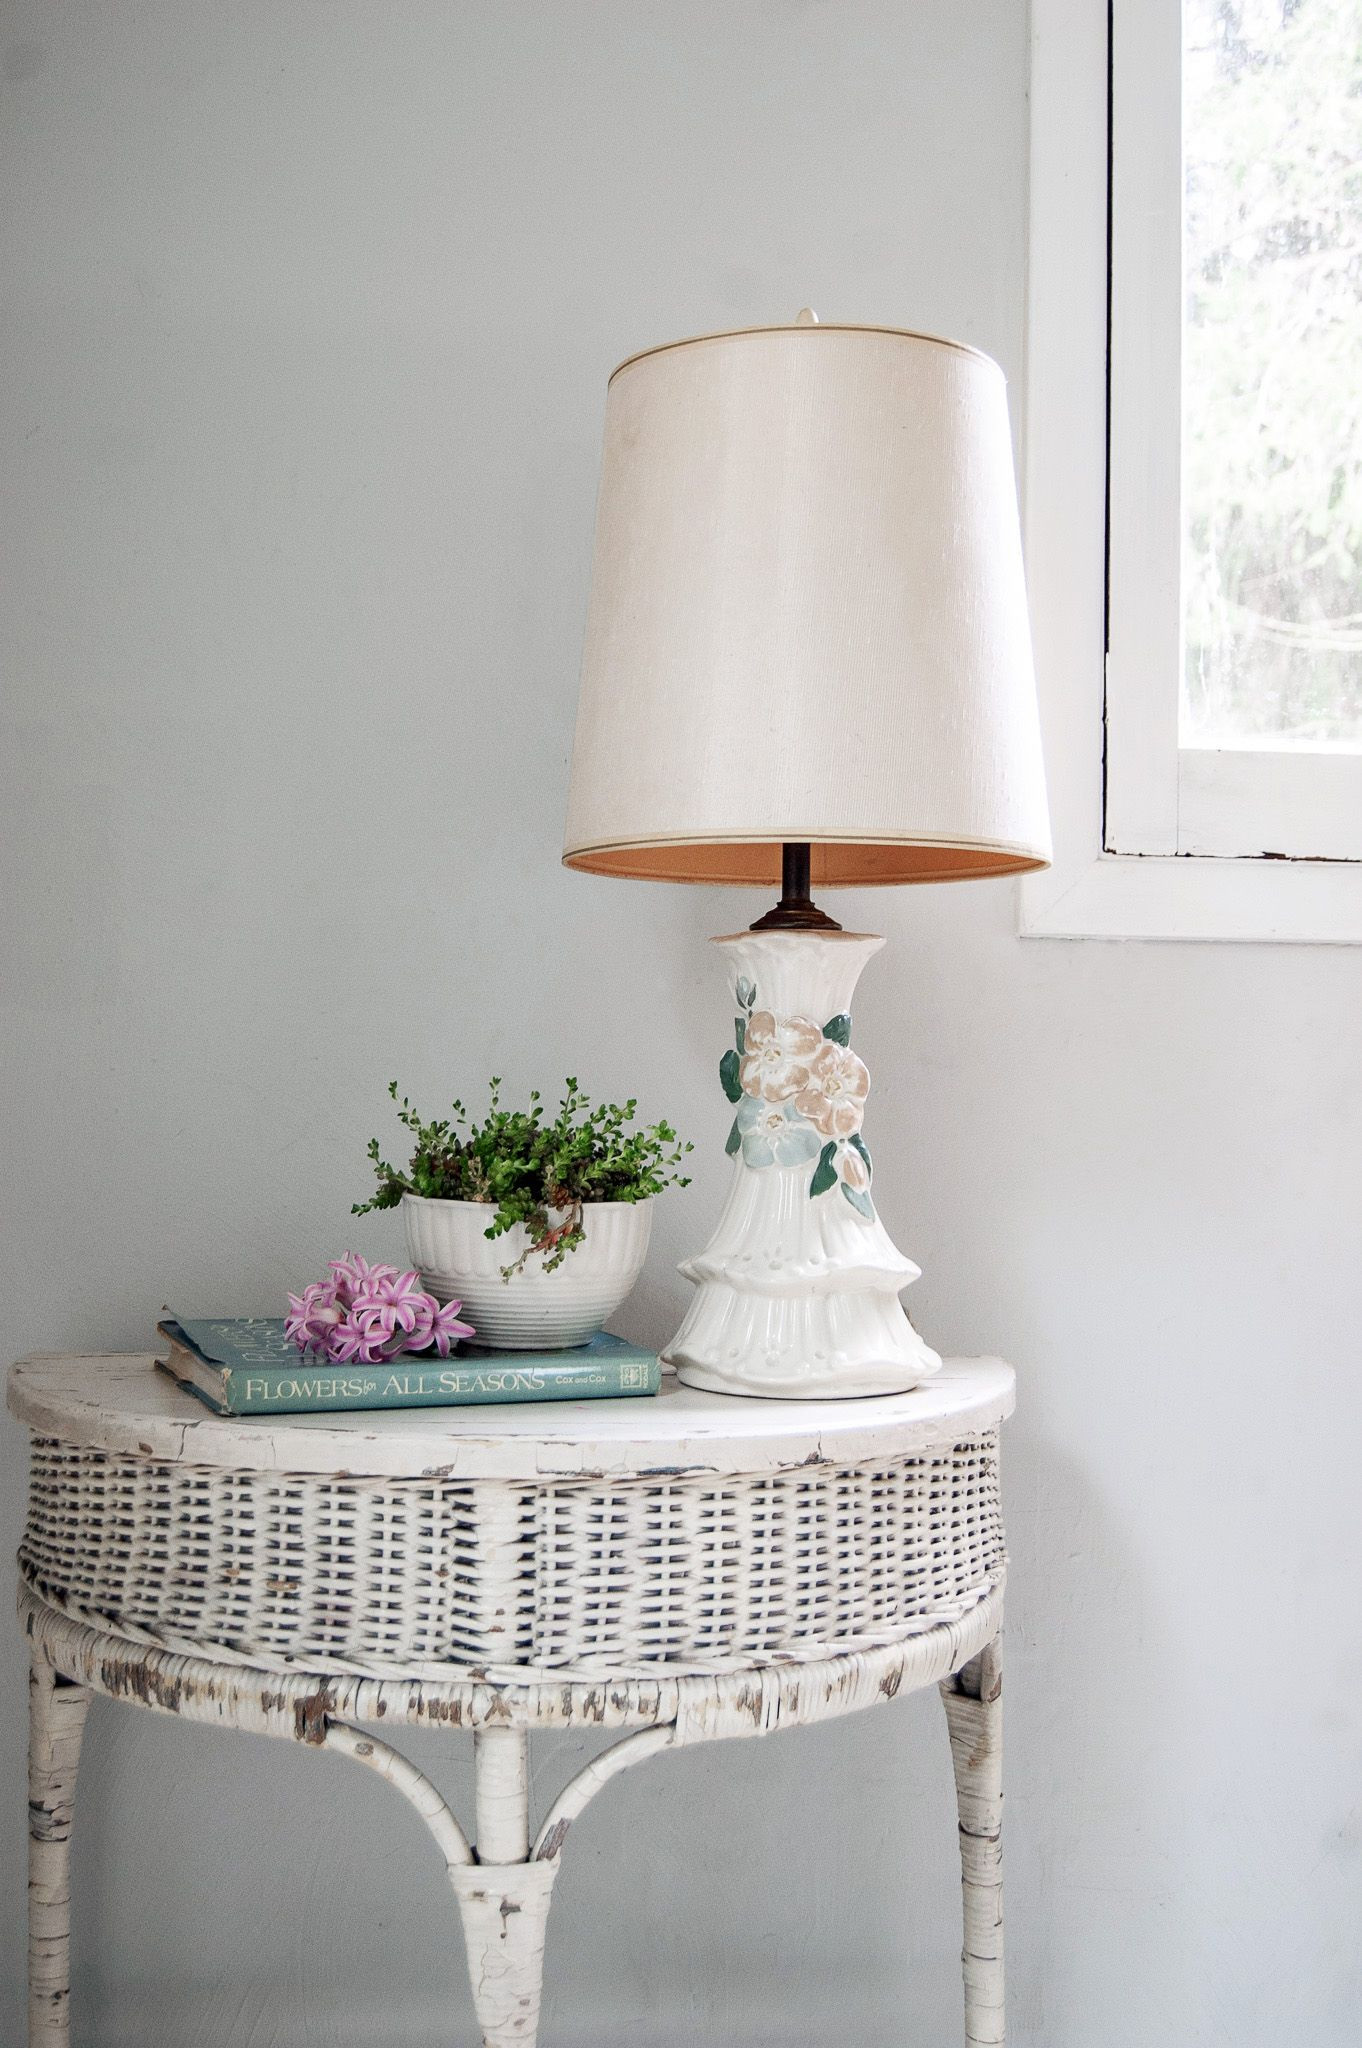 Shabby Chic Bedroom Lamps
 Romantic White Table Lamp Girls Bedroom Lamp Shabby Chic